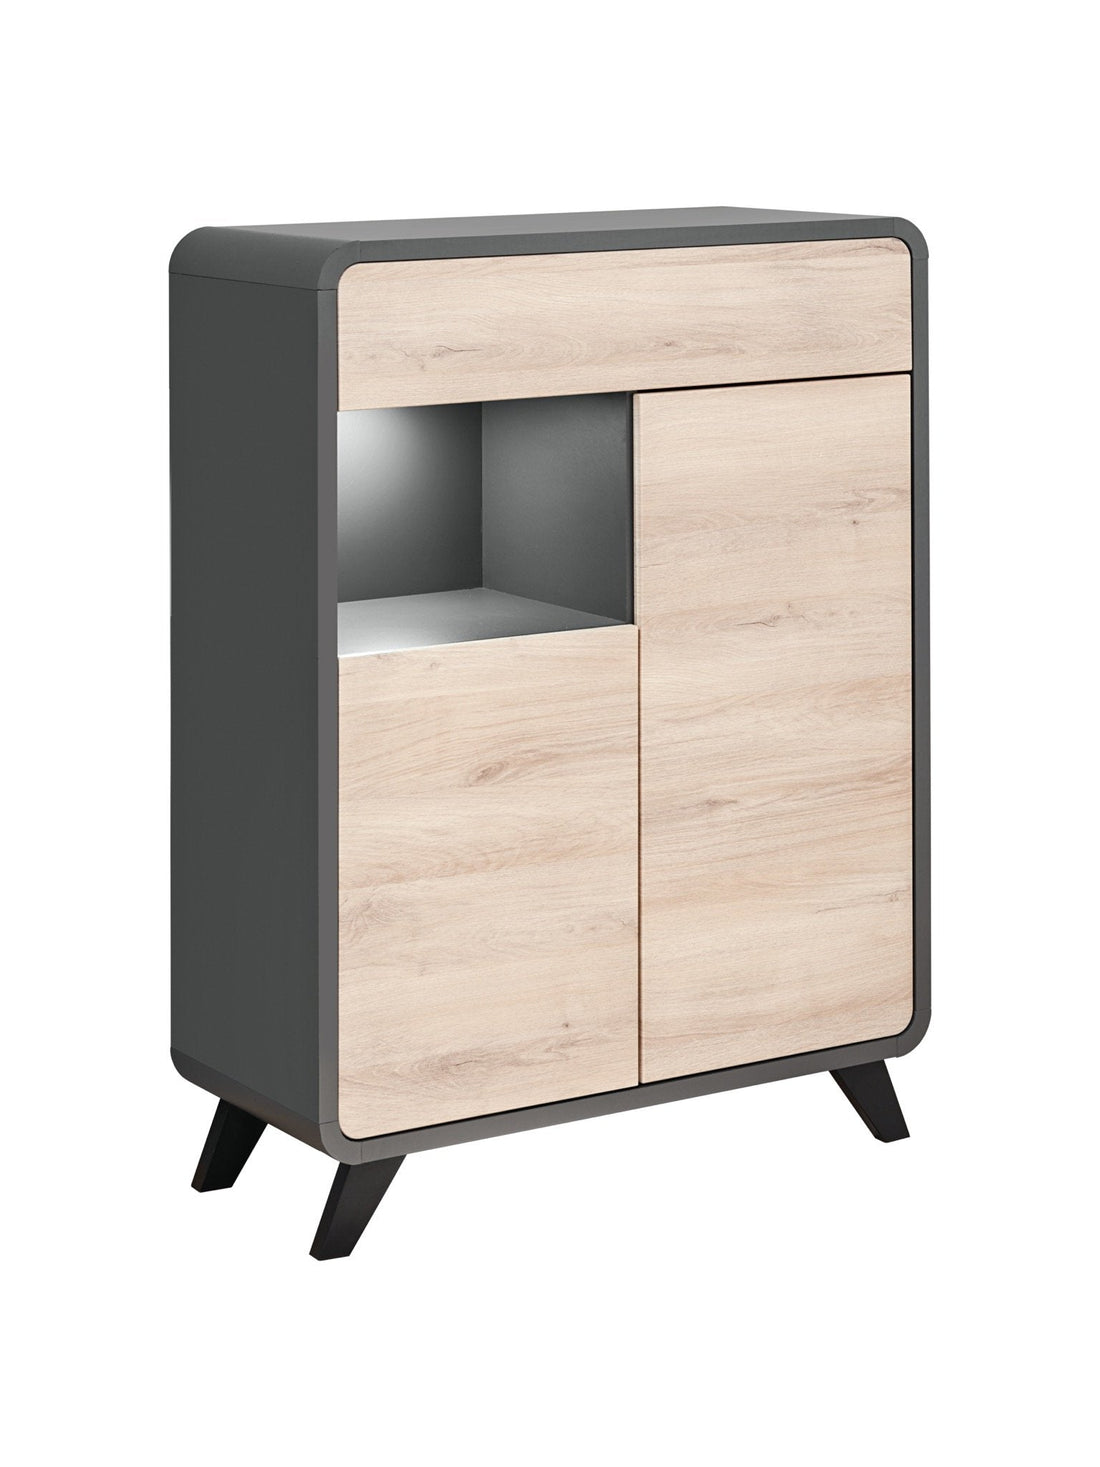 Round Cabinet - £372.6 - Living Sideboard Cabinet 